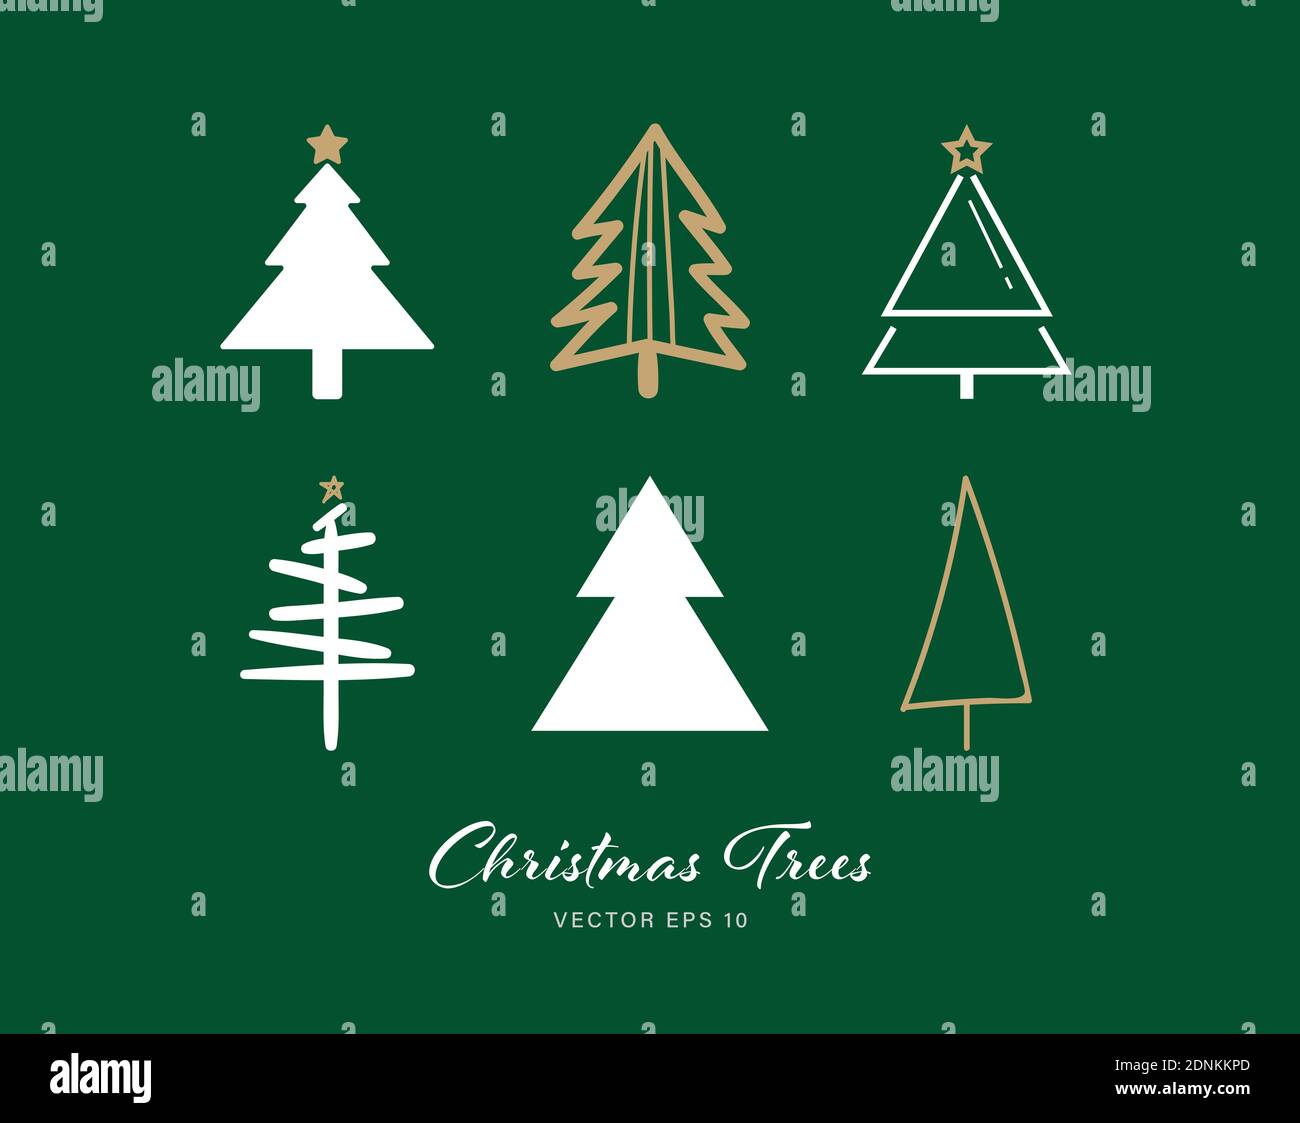 Christmas tree icon set of 6 designs on green color background Stock Vector